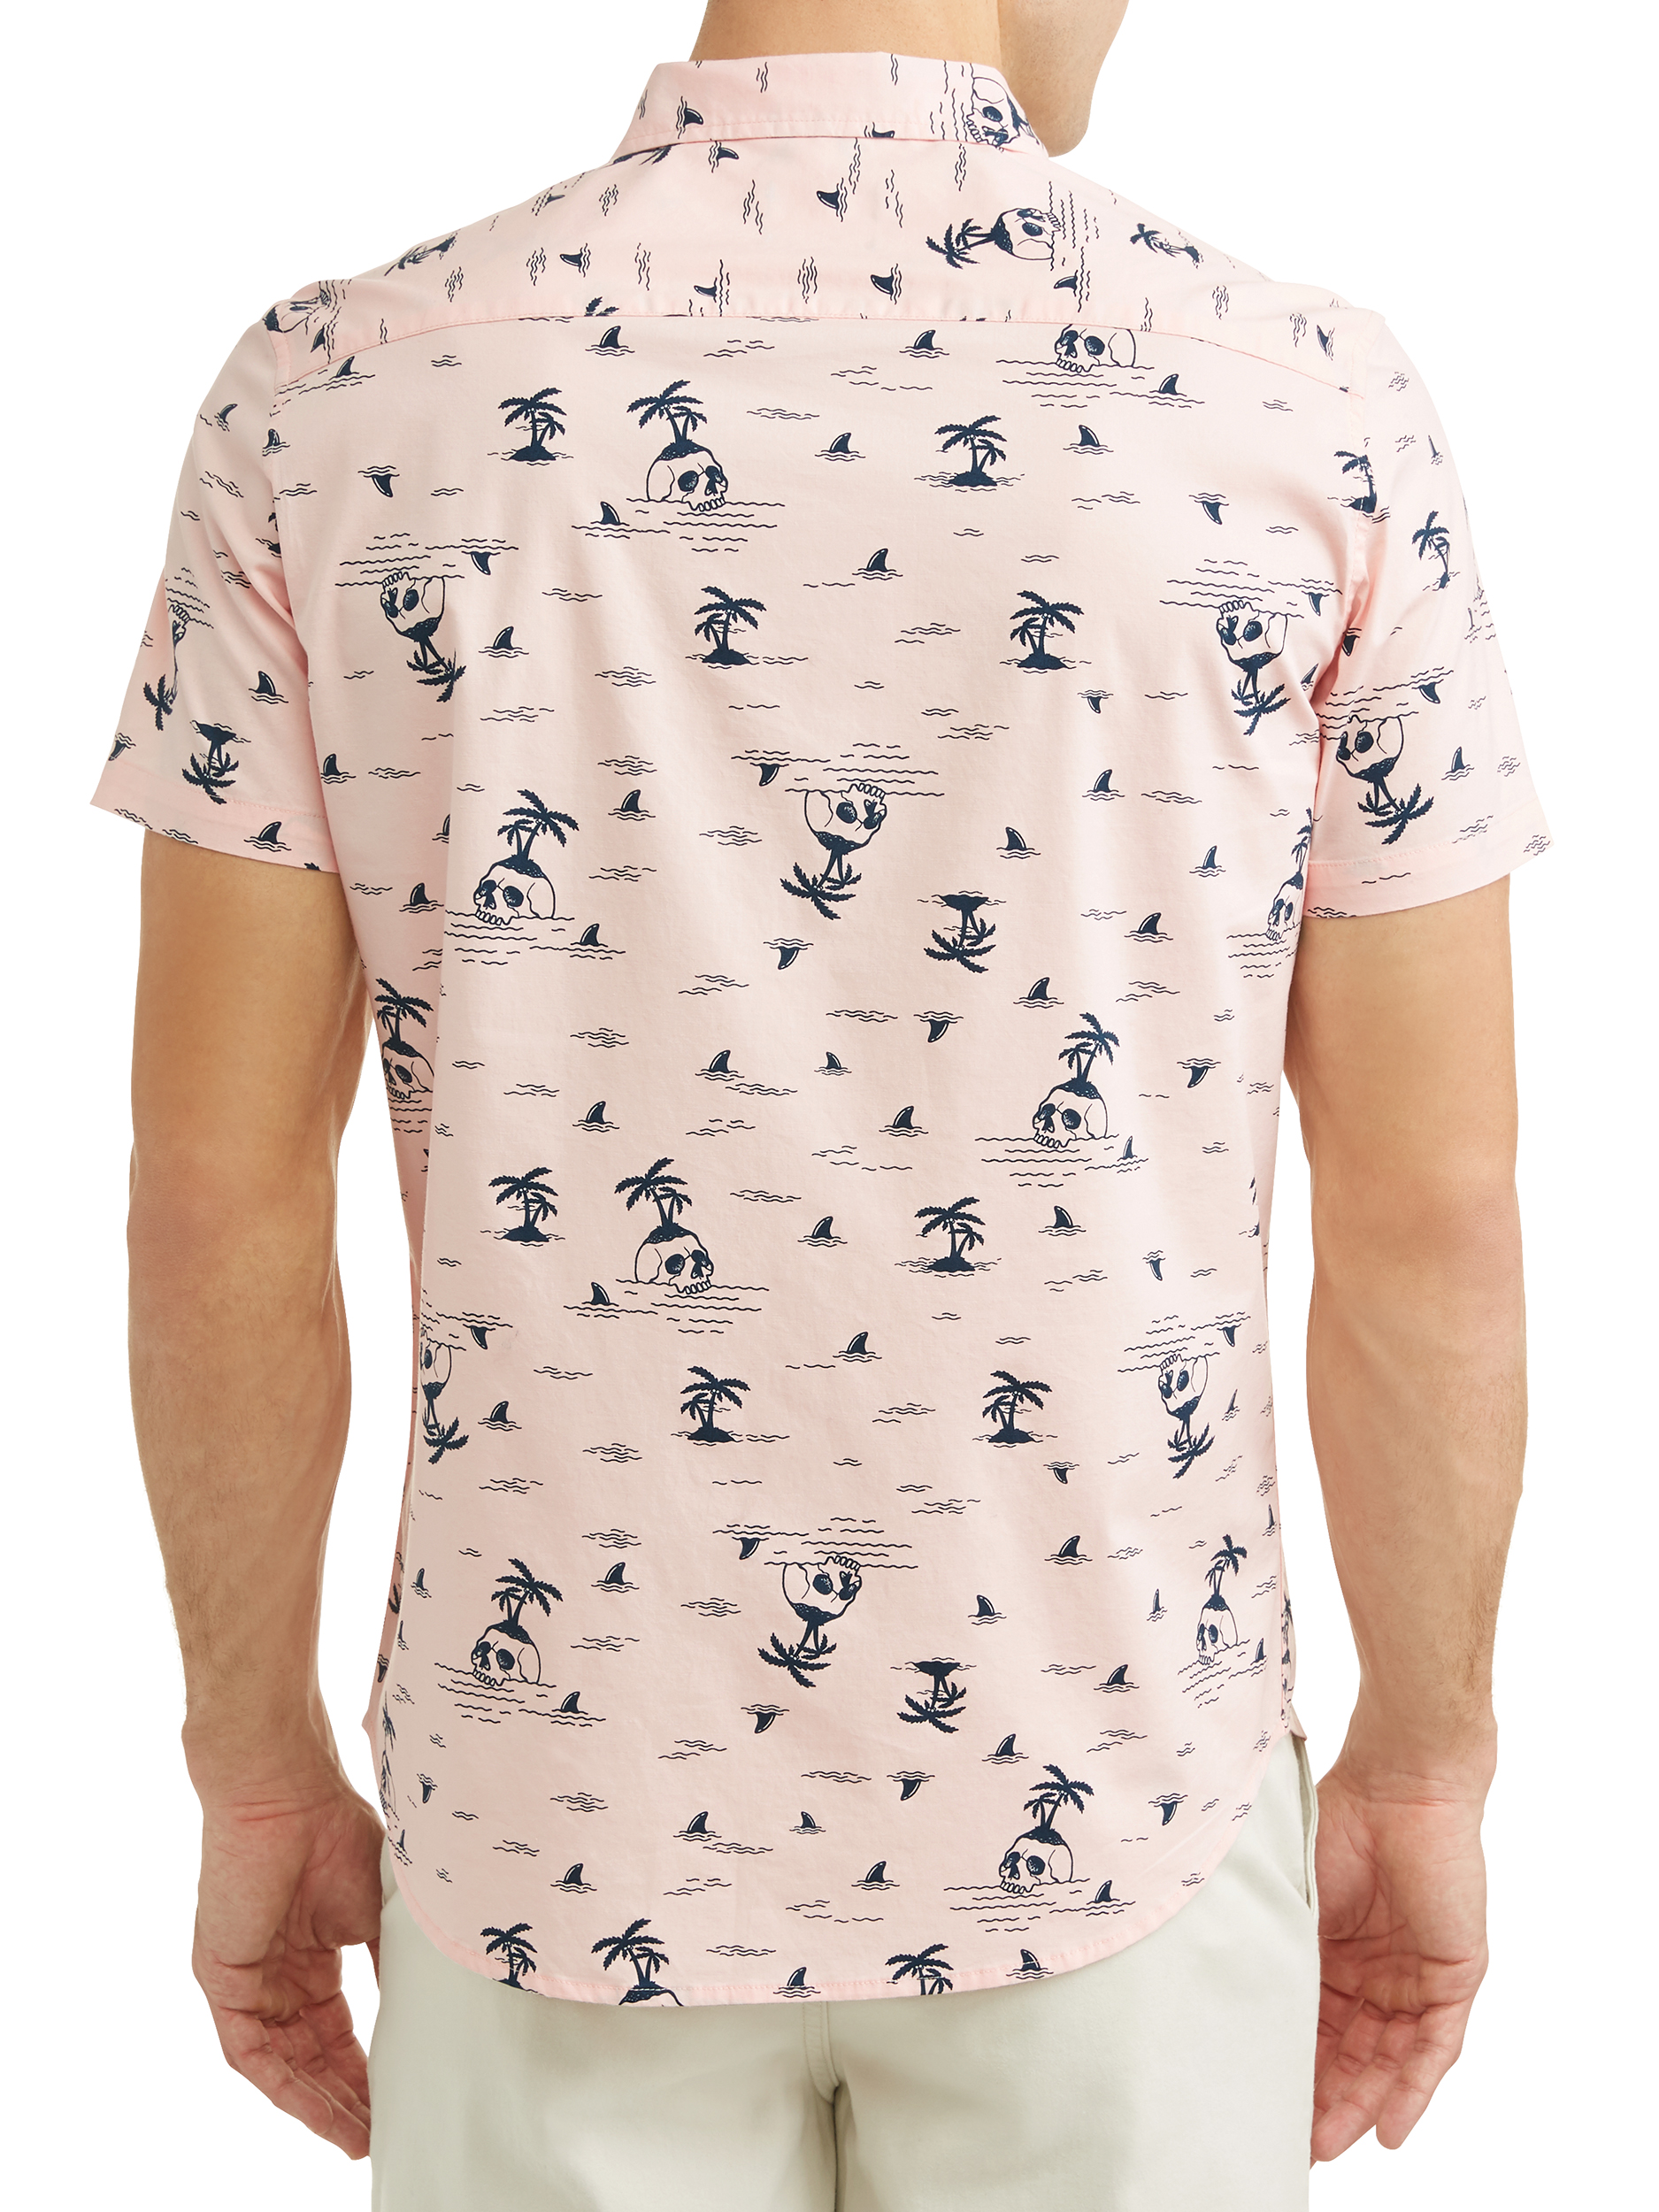 George Young Men's short sleeve Printed Shirt, up to size 3XL - image 3 of 4